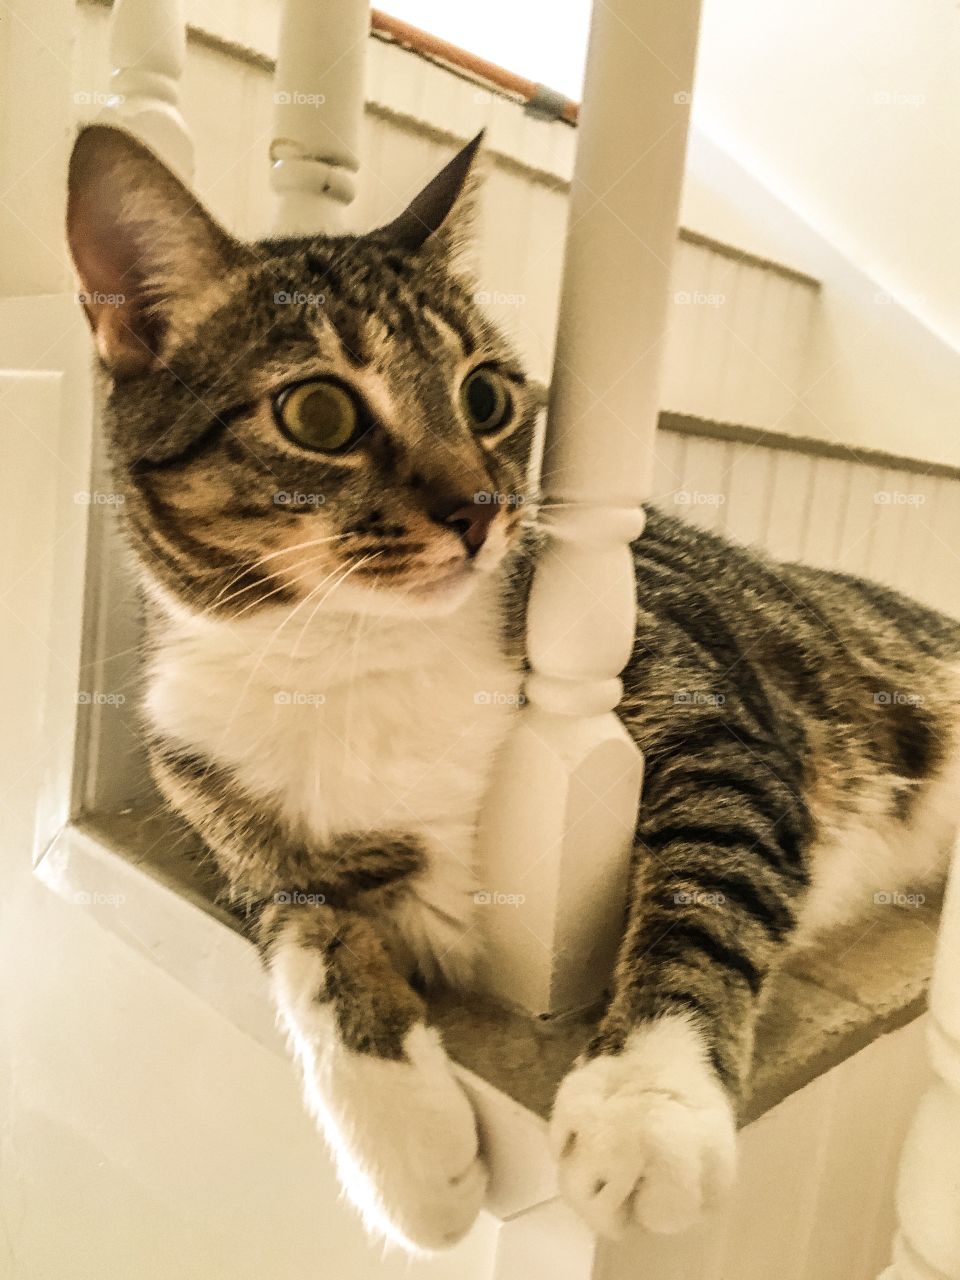 Tan and white striped tabby cat sitting on steps 